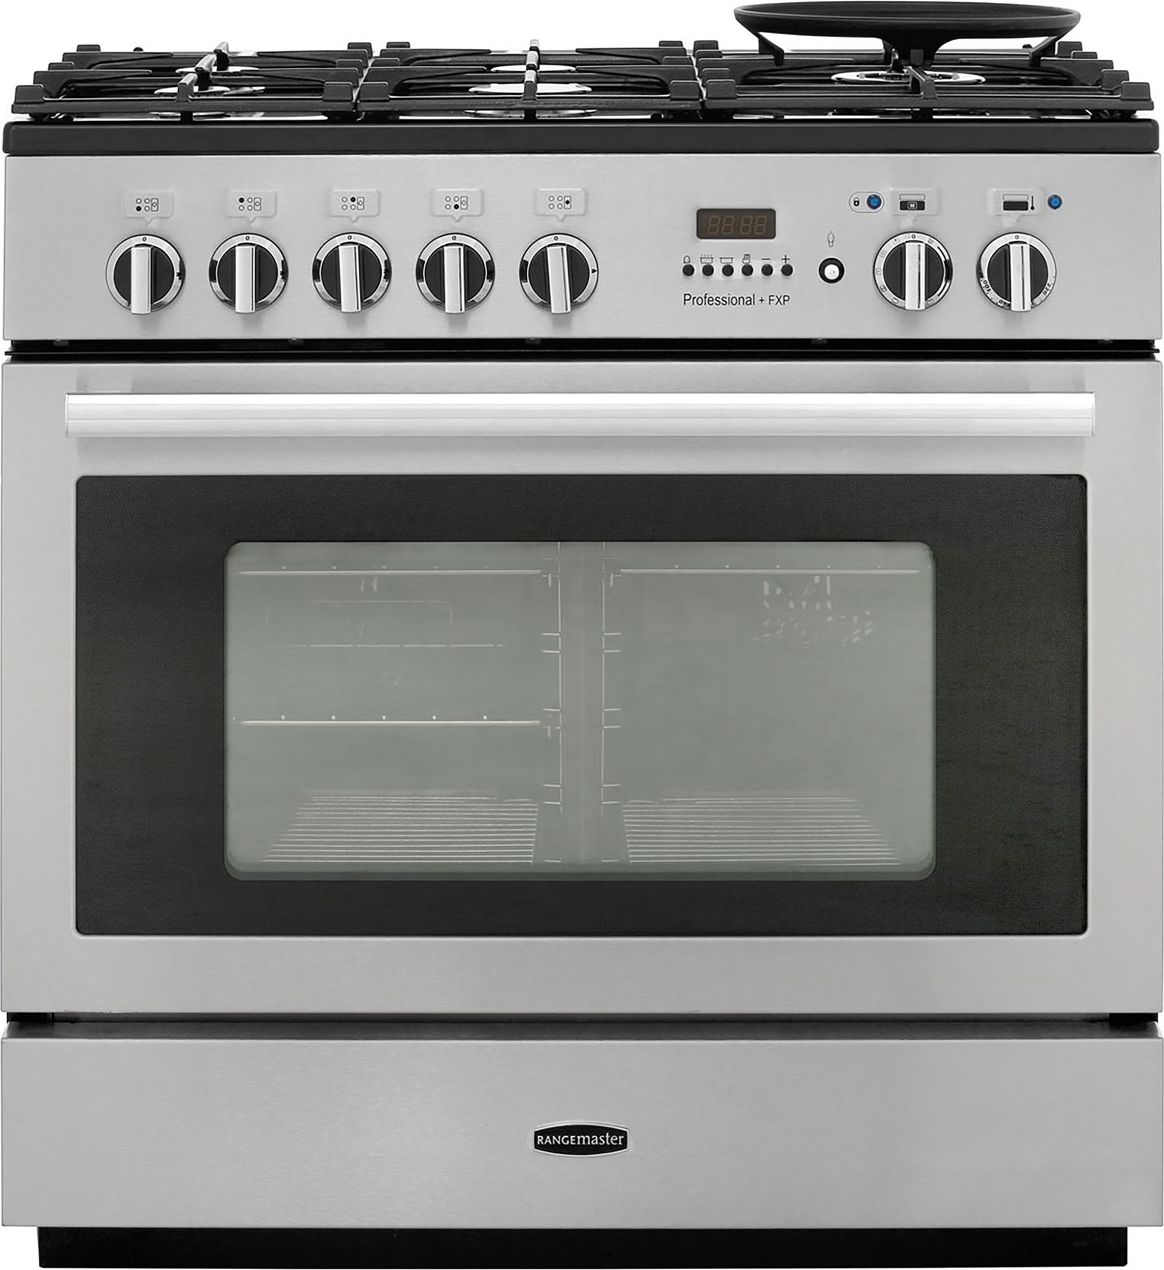 Rangemaster Professional Plus FXP PROP90FXPDFFSS/C 90cm Dual Fuel Range Cooker - Stainless Steel - A Rated, Stainless Steel